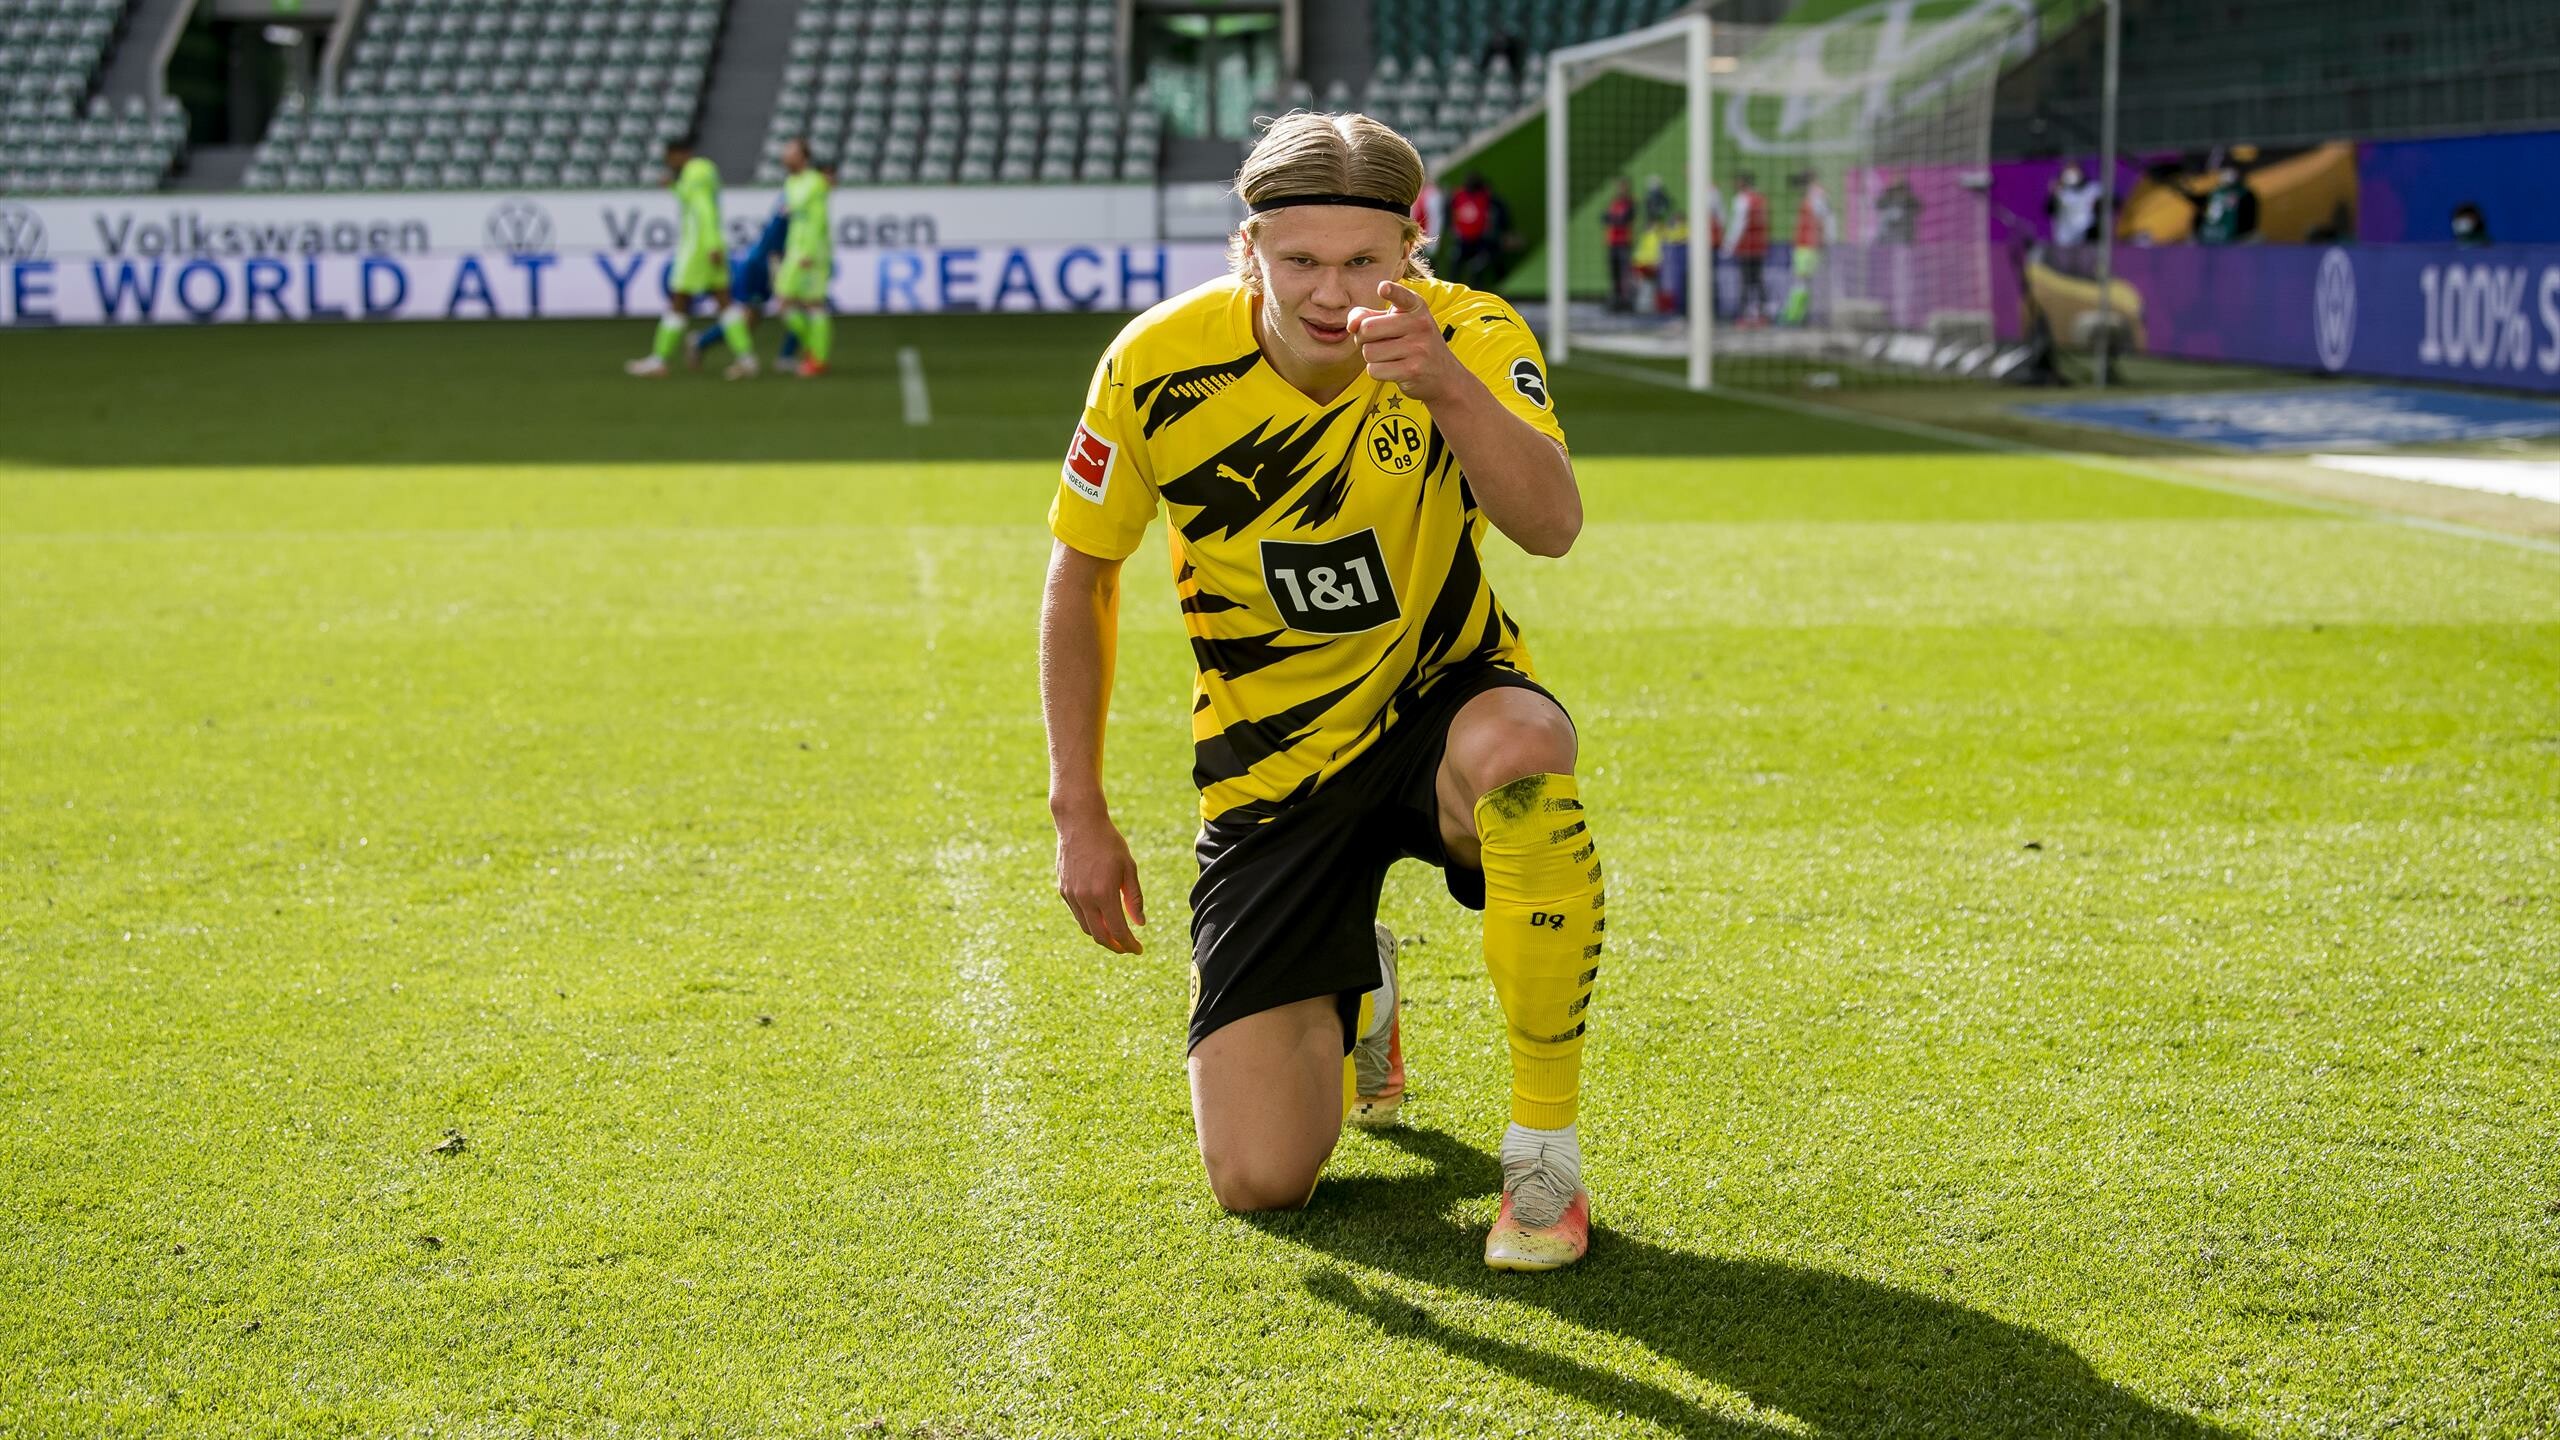 Erling Haaland: Made his debut for Dortmund away at FC Augsburg on 18 January 2020, coming on as a second-half substitute and scoring a hat-trick within 23 minutes in a 5–3 win. 2560x1440 HD Wallpaper.